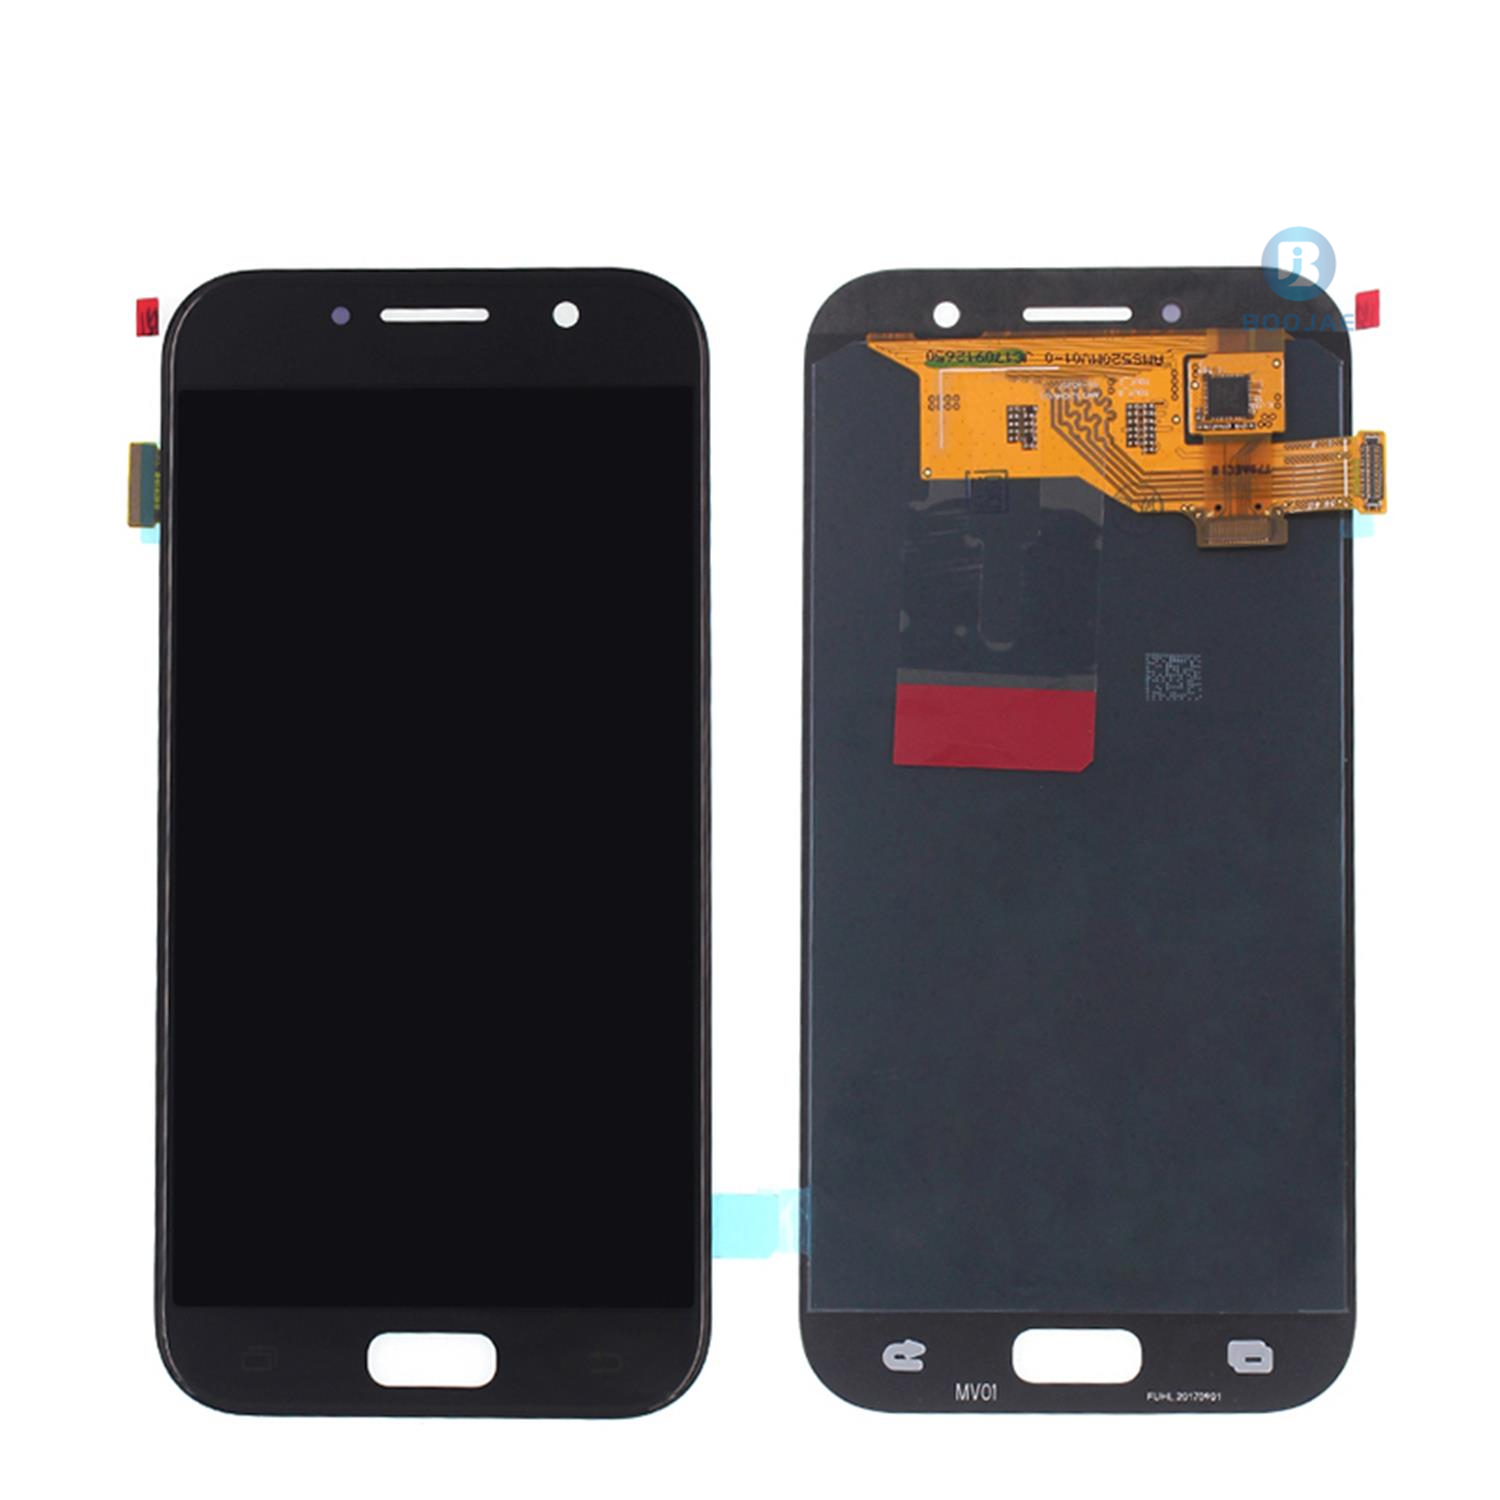 Samsung Galaxy A520 LCD Screen Display and Touch Panel Digitizer Assembly Replacement